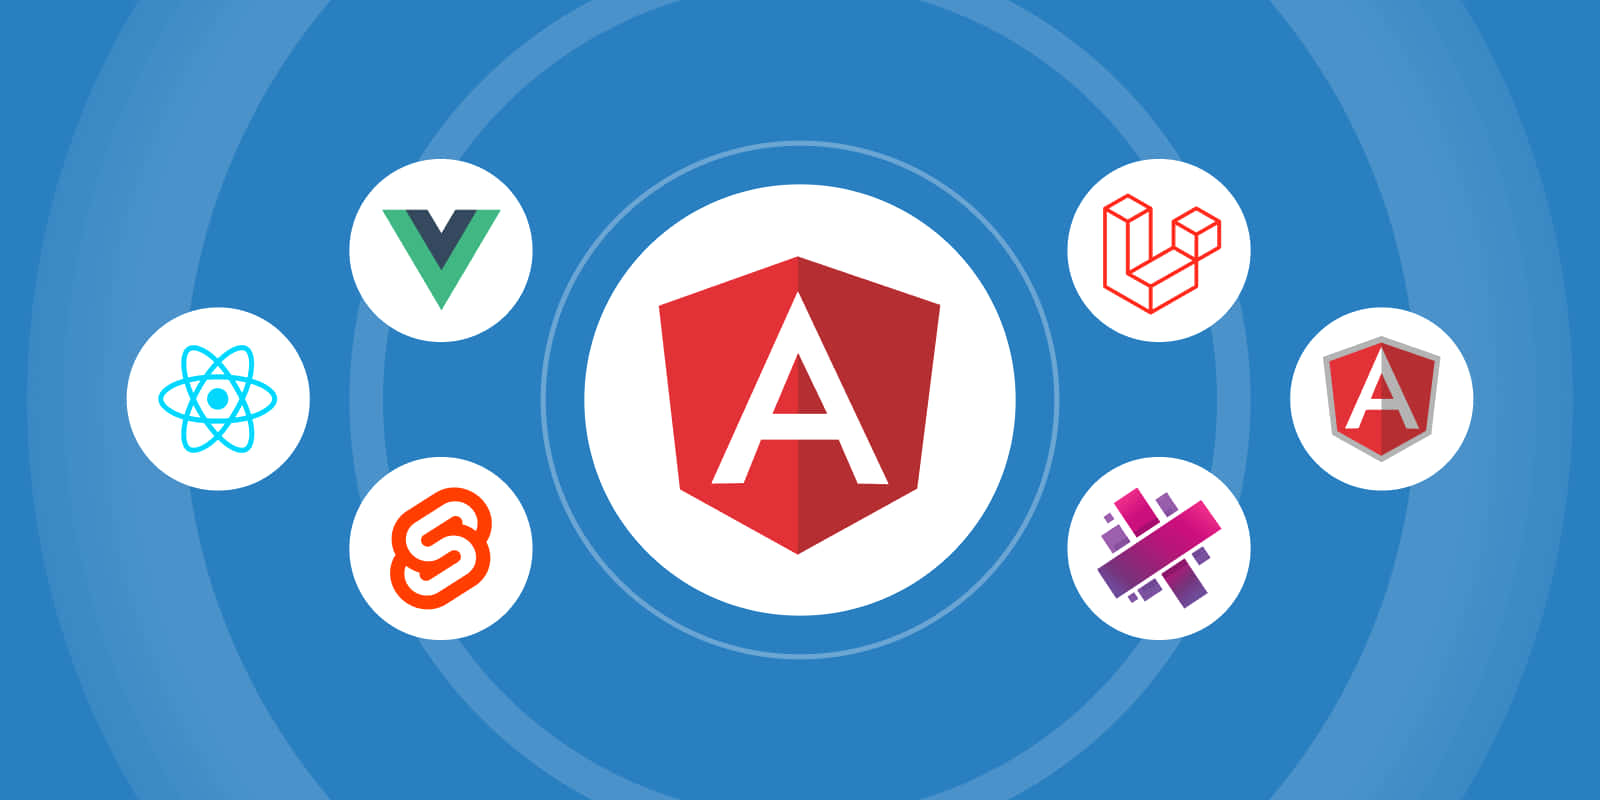 Angular With Other Web Development Companies Wallpaper